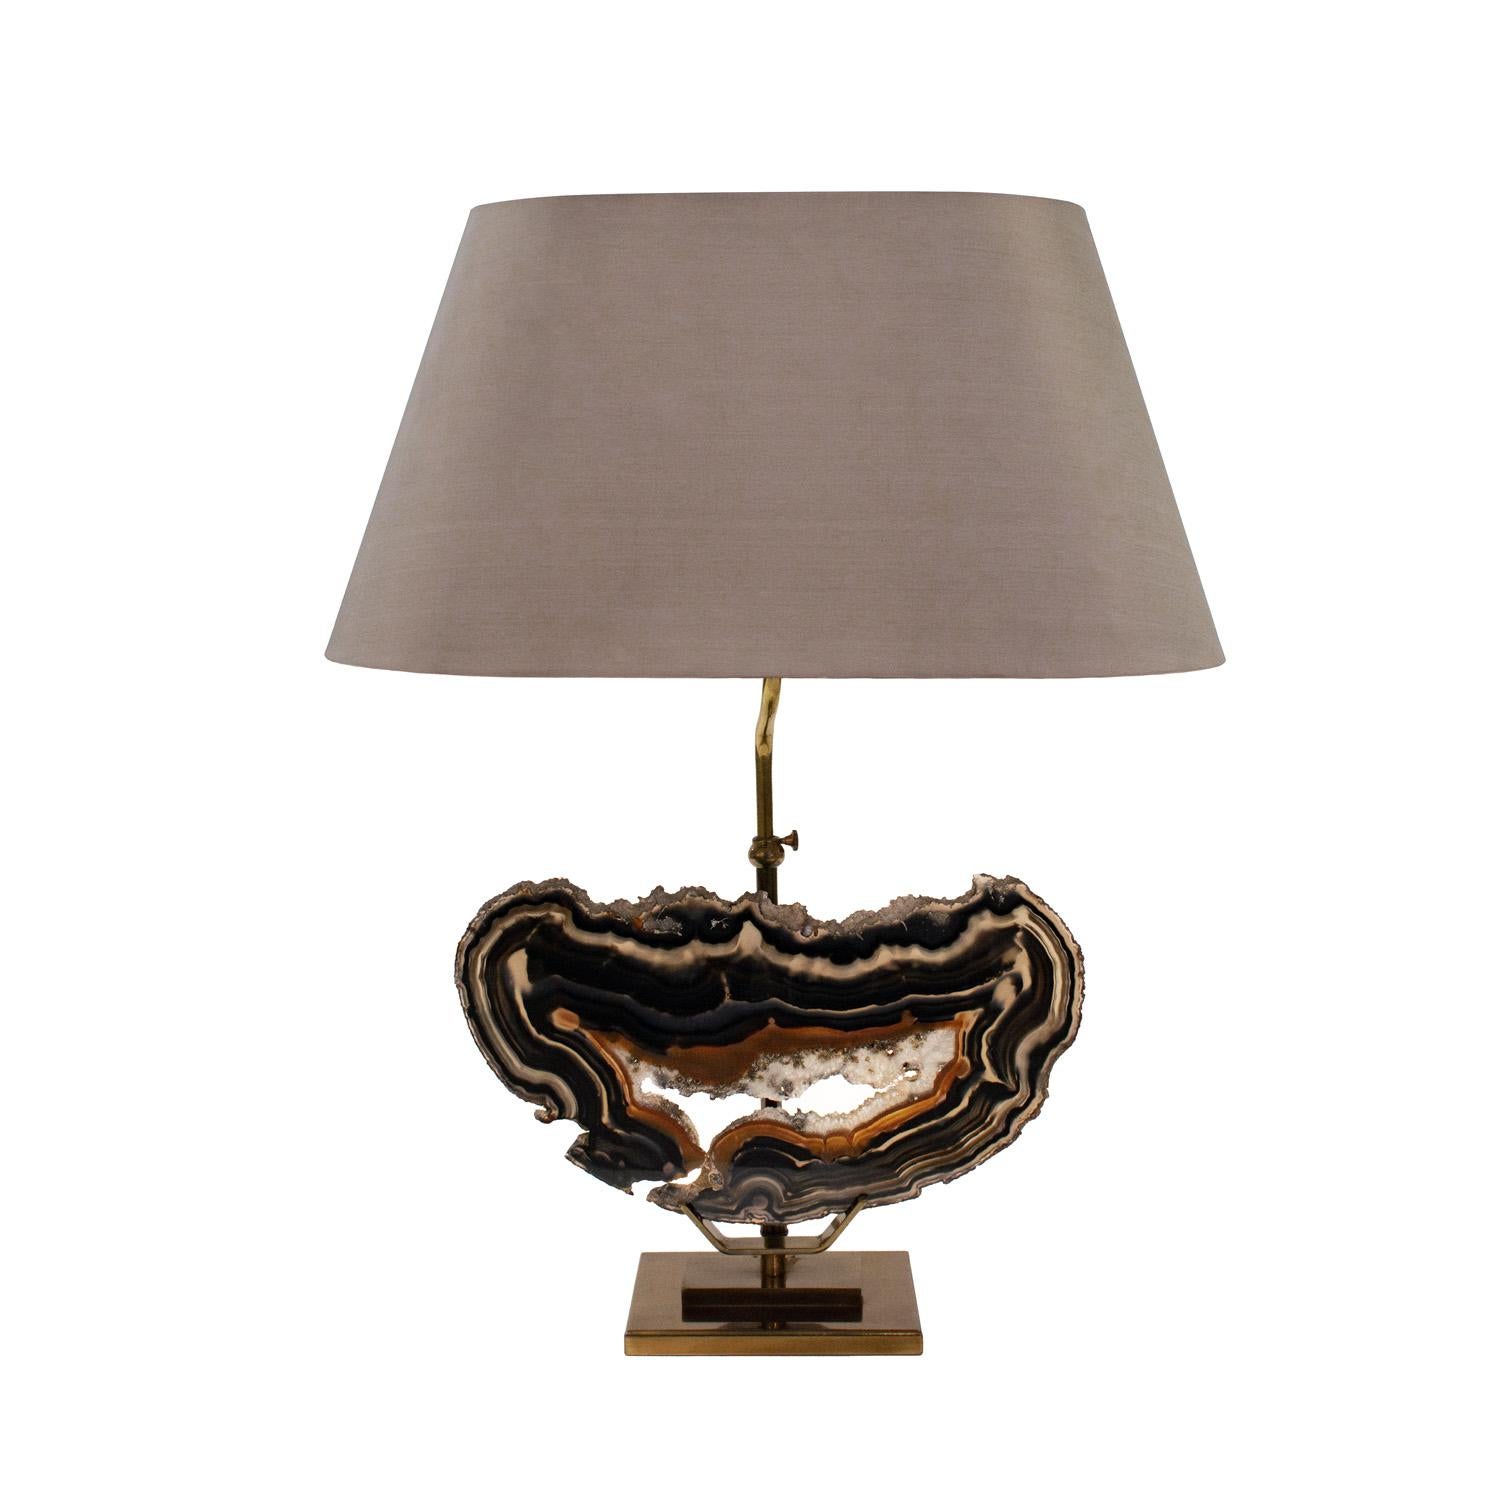 Exquisitely crafted table lamp in bronze with mounted polished agate specimen, Belgium 1970's.   The coloration of the agate, with black, beige and amber, is very chic.  This lamp has been newly rewired and comes with a silk shade with a diffuser at